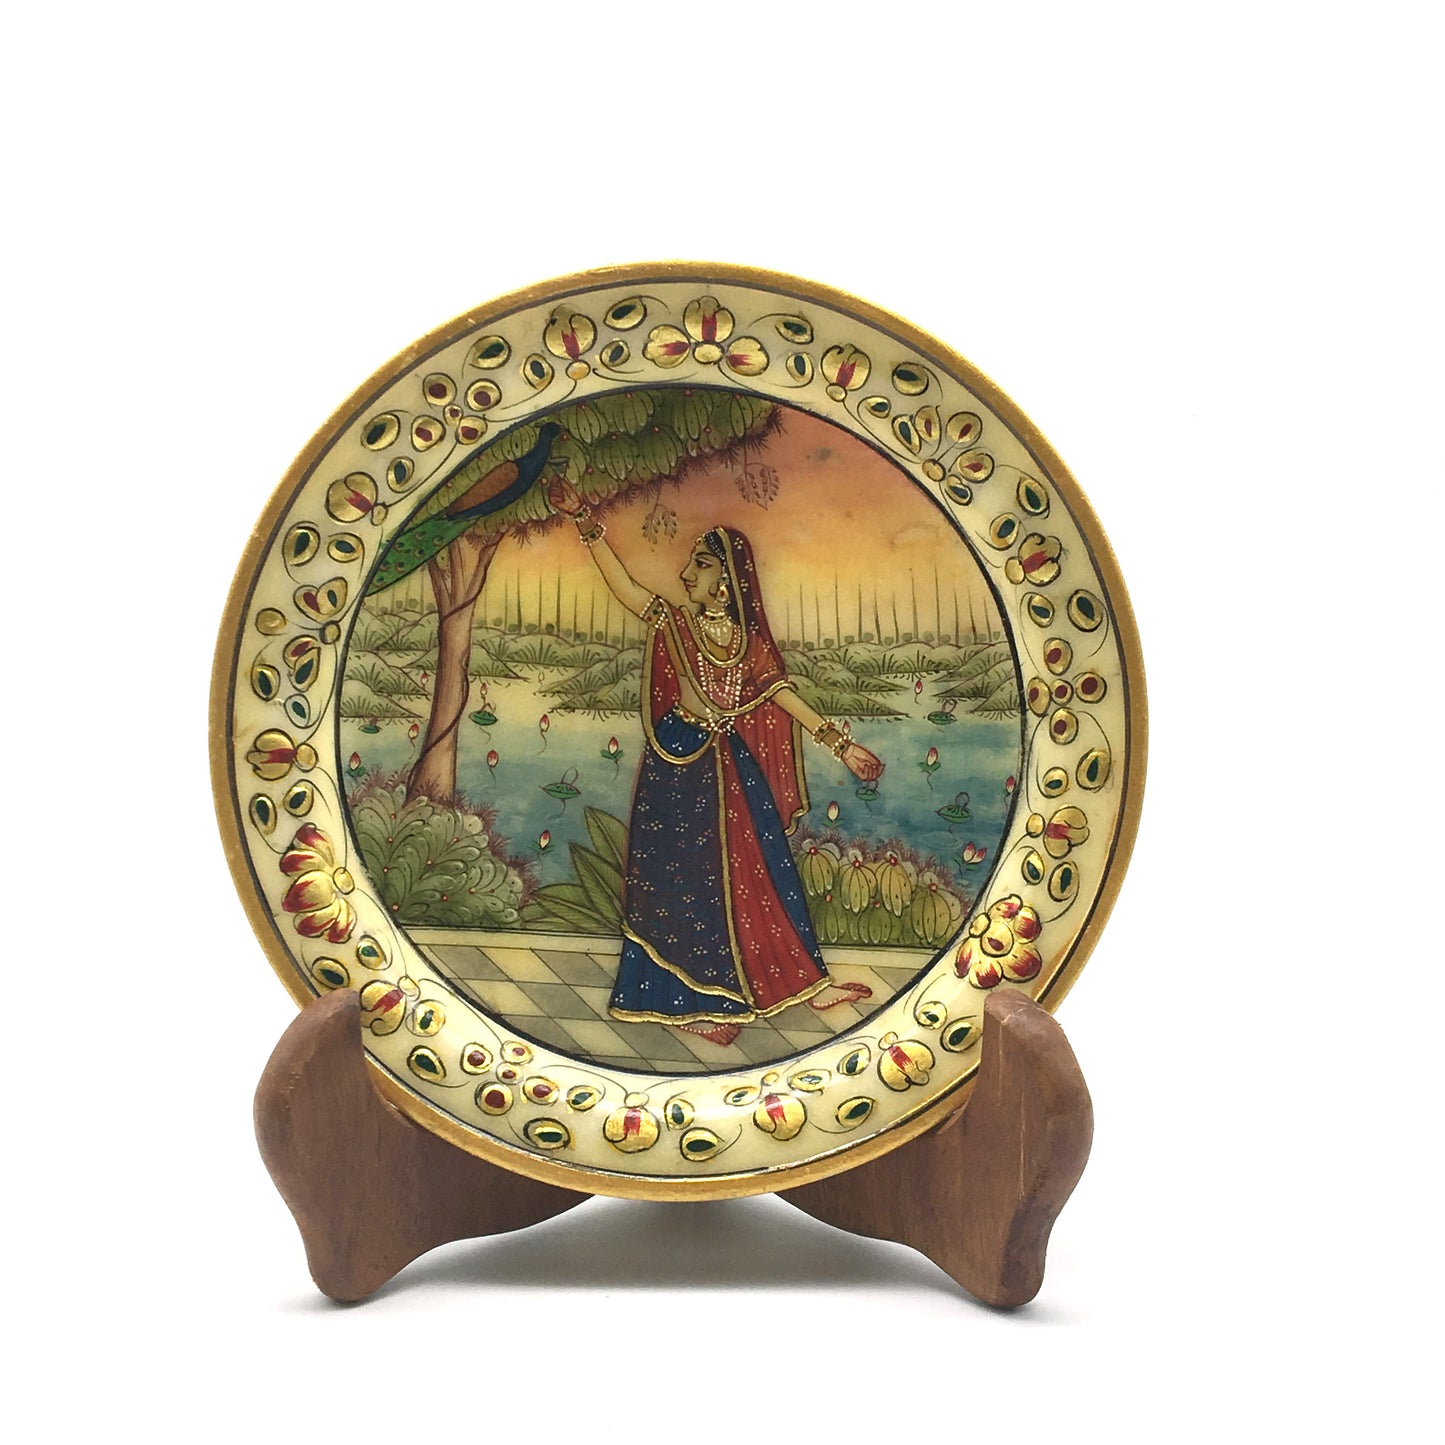 Handmade Collectible India Decorative Marble Plate with Wood Stand-Gold Trim - Montecinos Ethnic